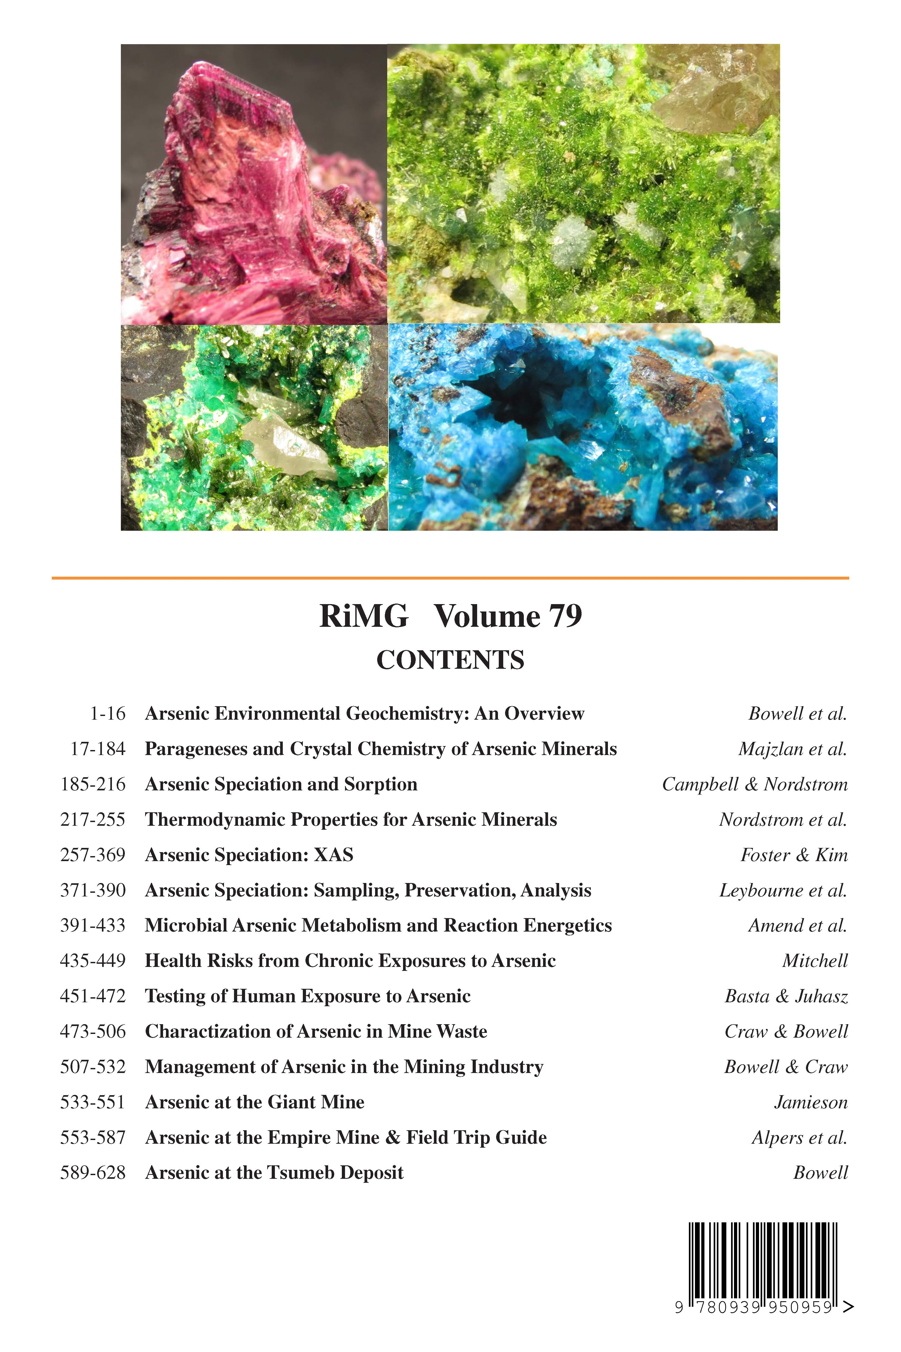 Back Cover of Reviews in Mineralogy and Geochmistry vol 79